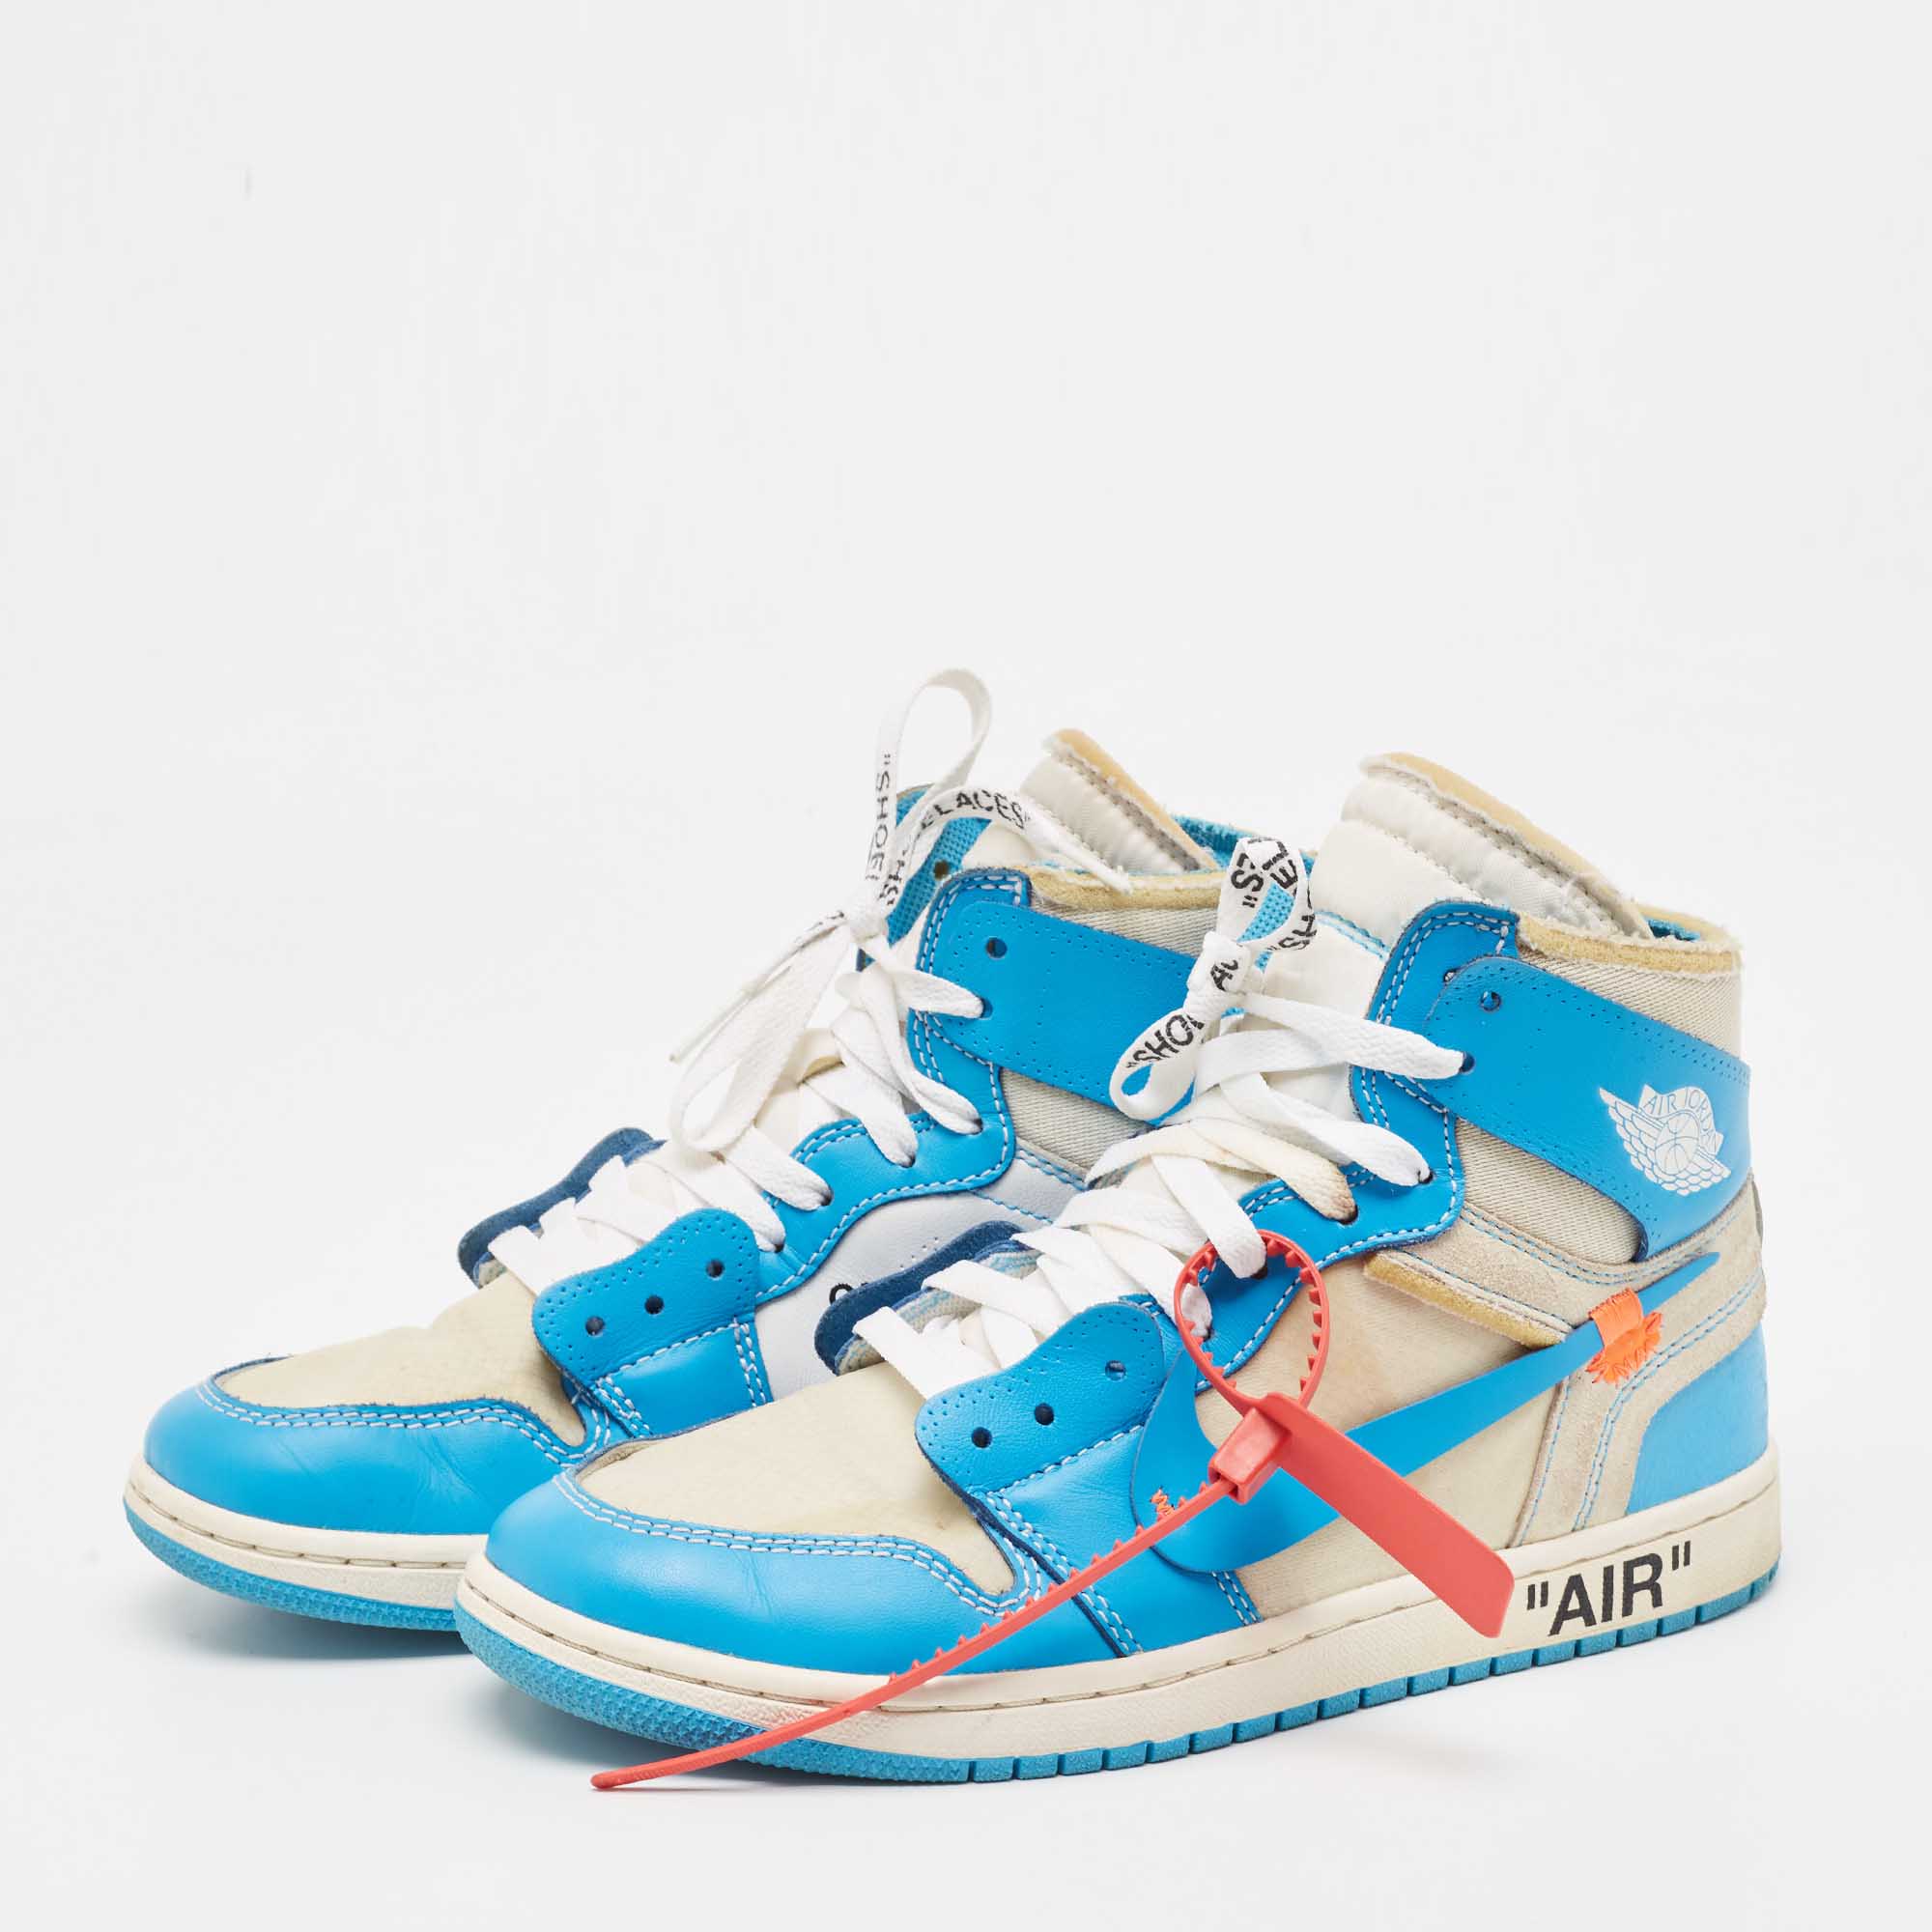 

Off-White x Nike Blue/Grey Leather and Mesh Jordan 1 Retro High Sneakers Size